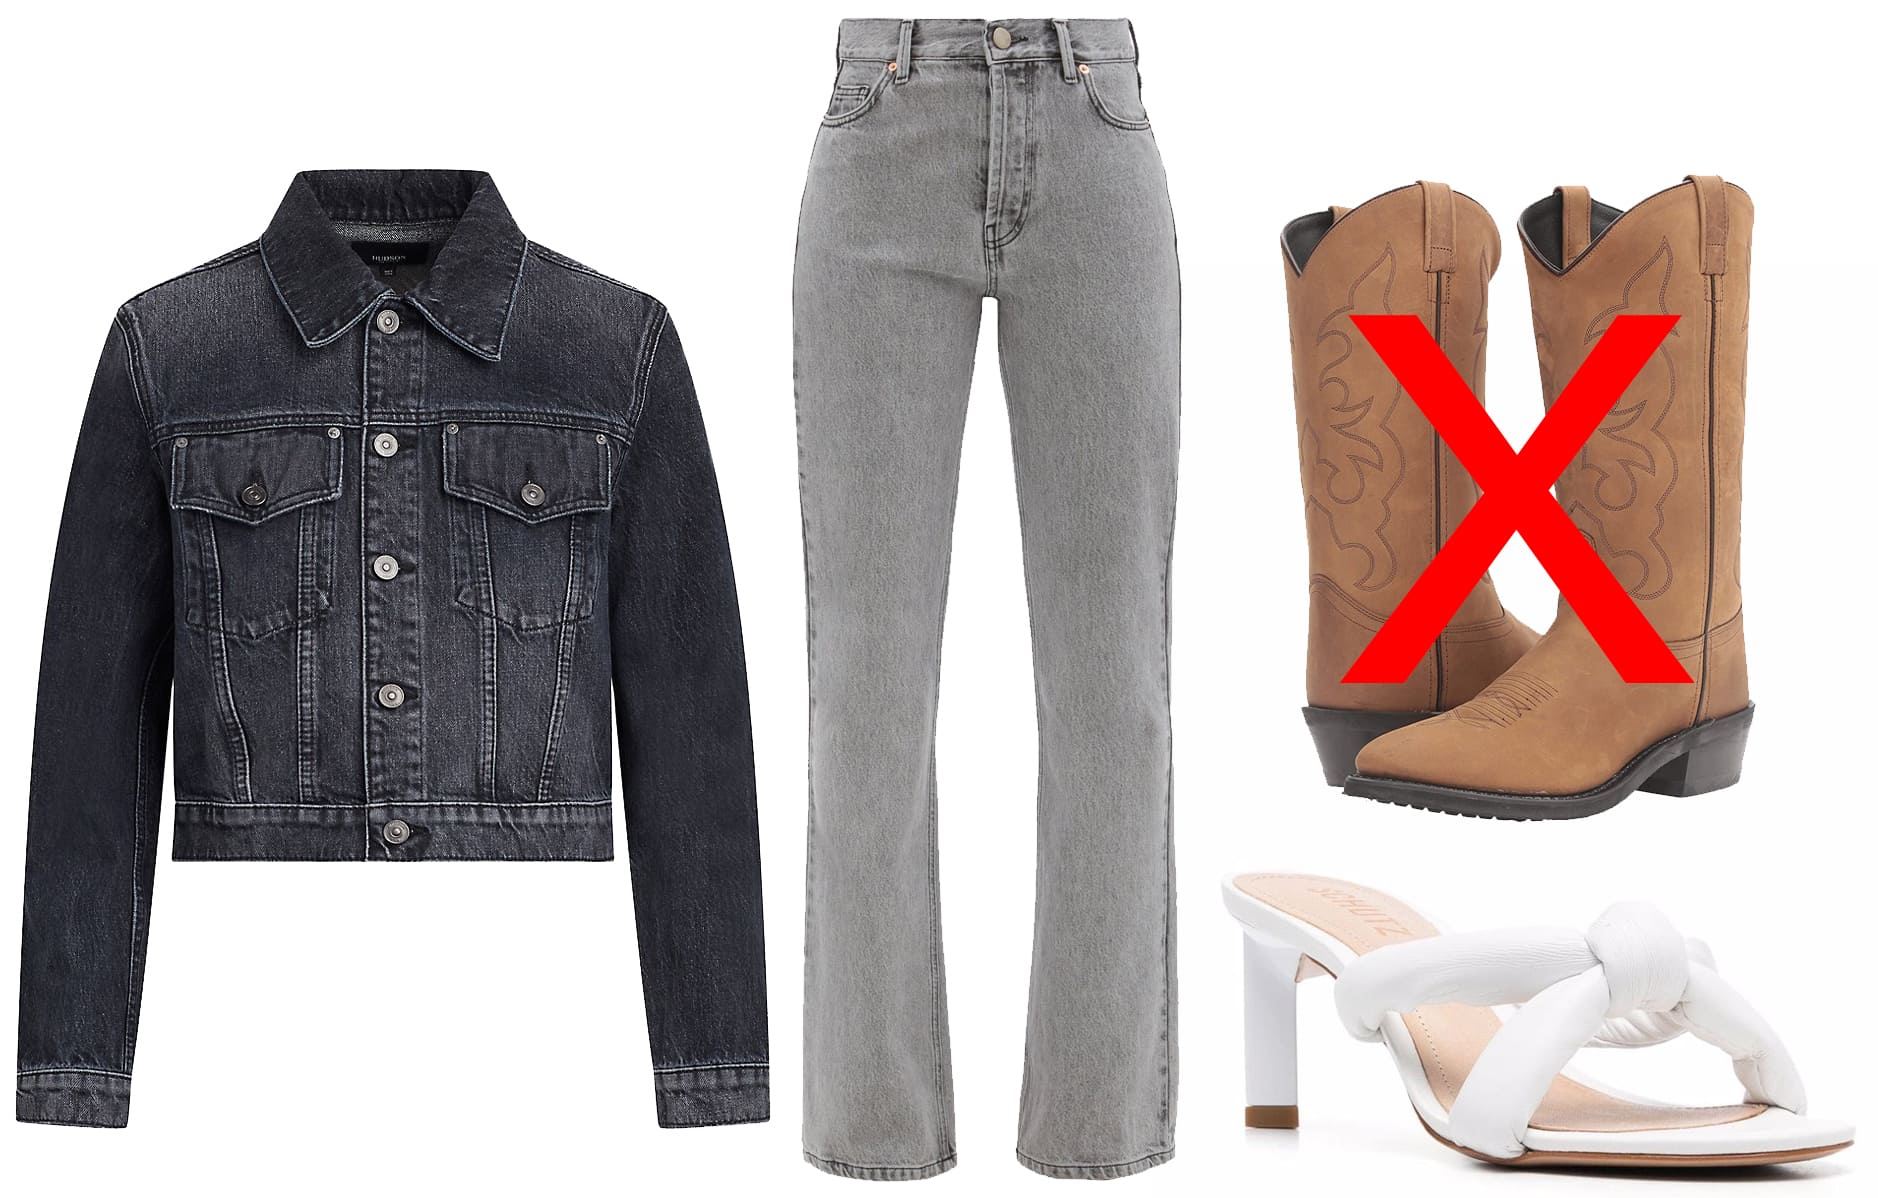 Refined Denim Ensemble: Featuring Hudson Jeans' Gia Cropped Denim Jacket and Raey's Angel Organic-Cotton Bootcut Jeans, finished with Schutz's open-toe heeled sandals, this look steers clear of the Wild West cliché, embracing a more modern, chic interpretation of denim-on-denim